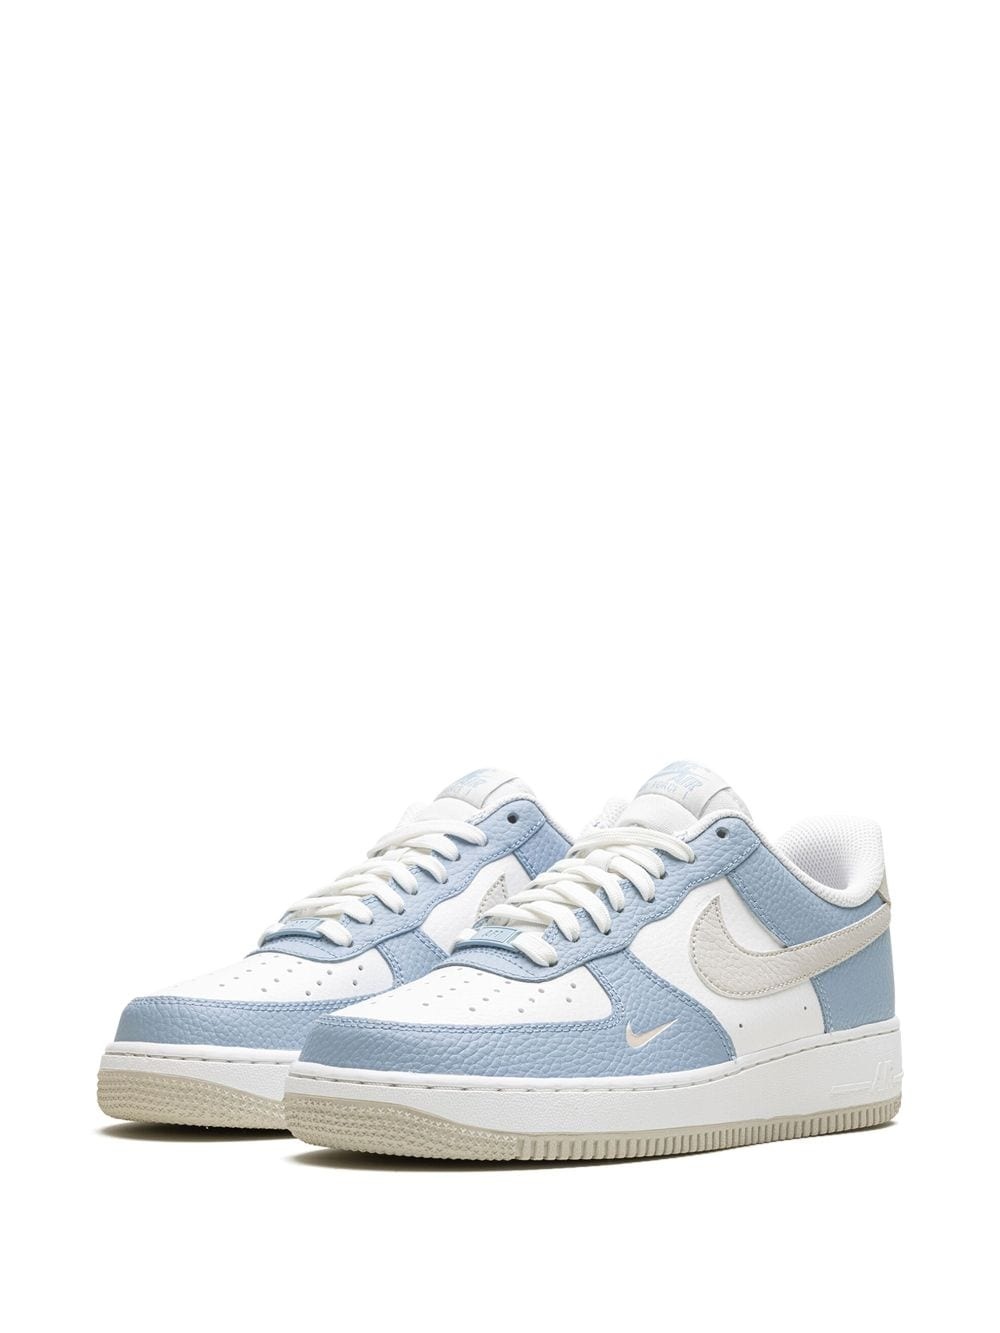 Air Force '07 "Baby Blue" sneakers - 4